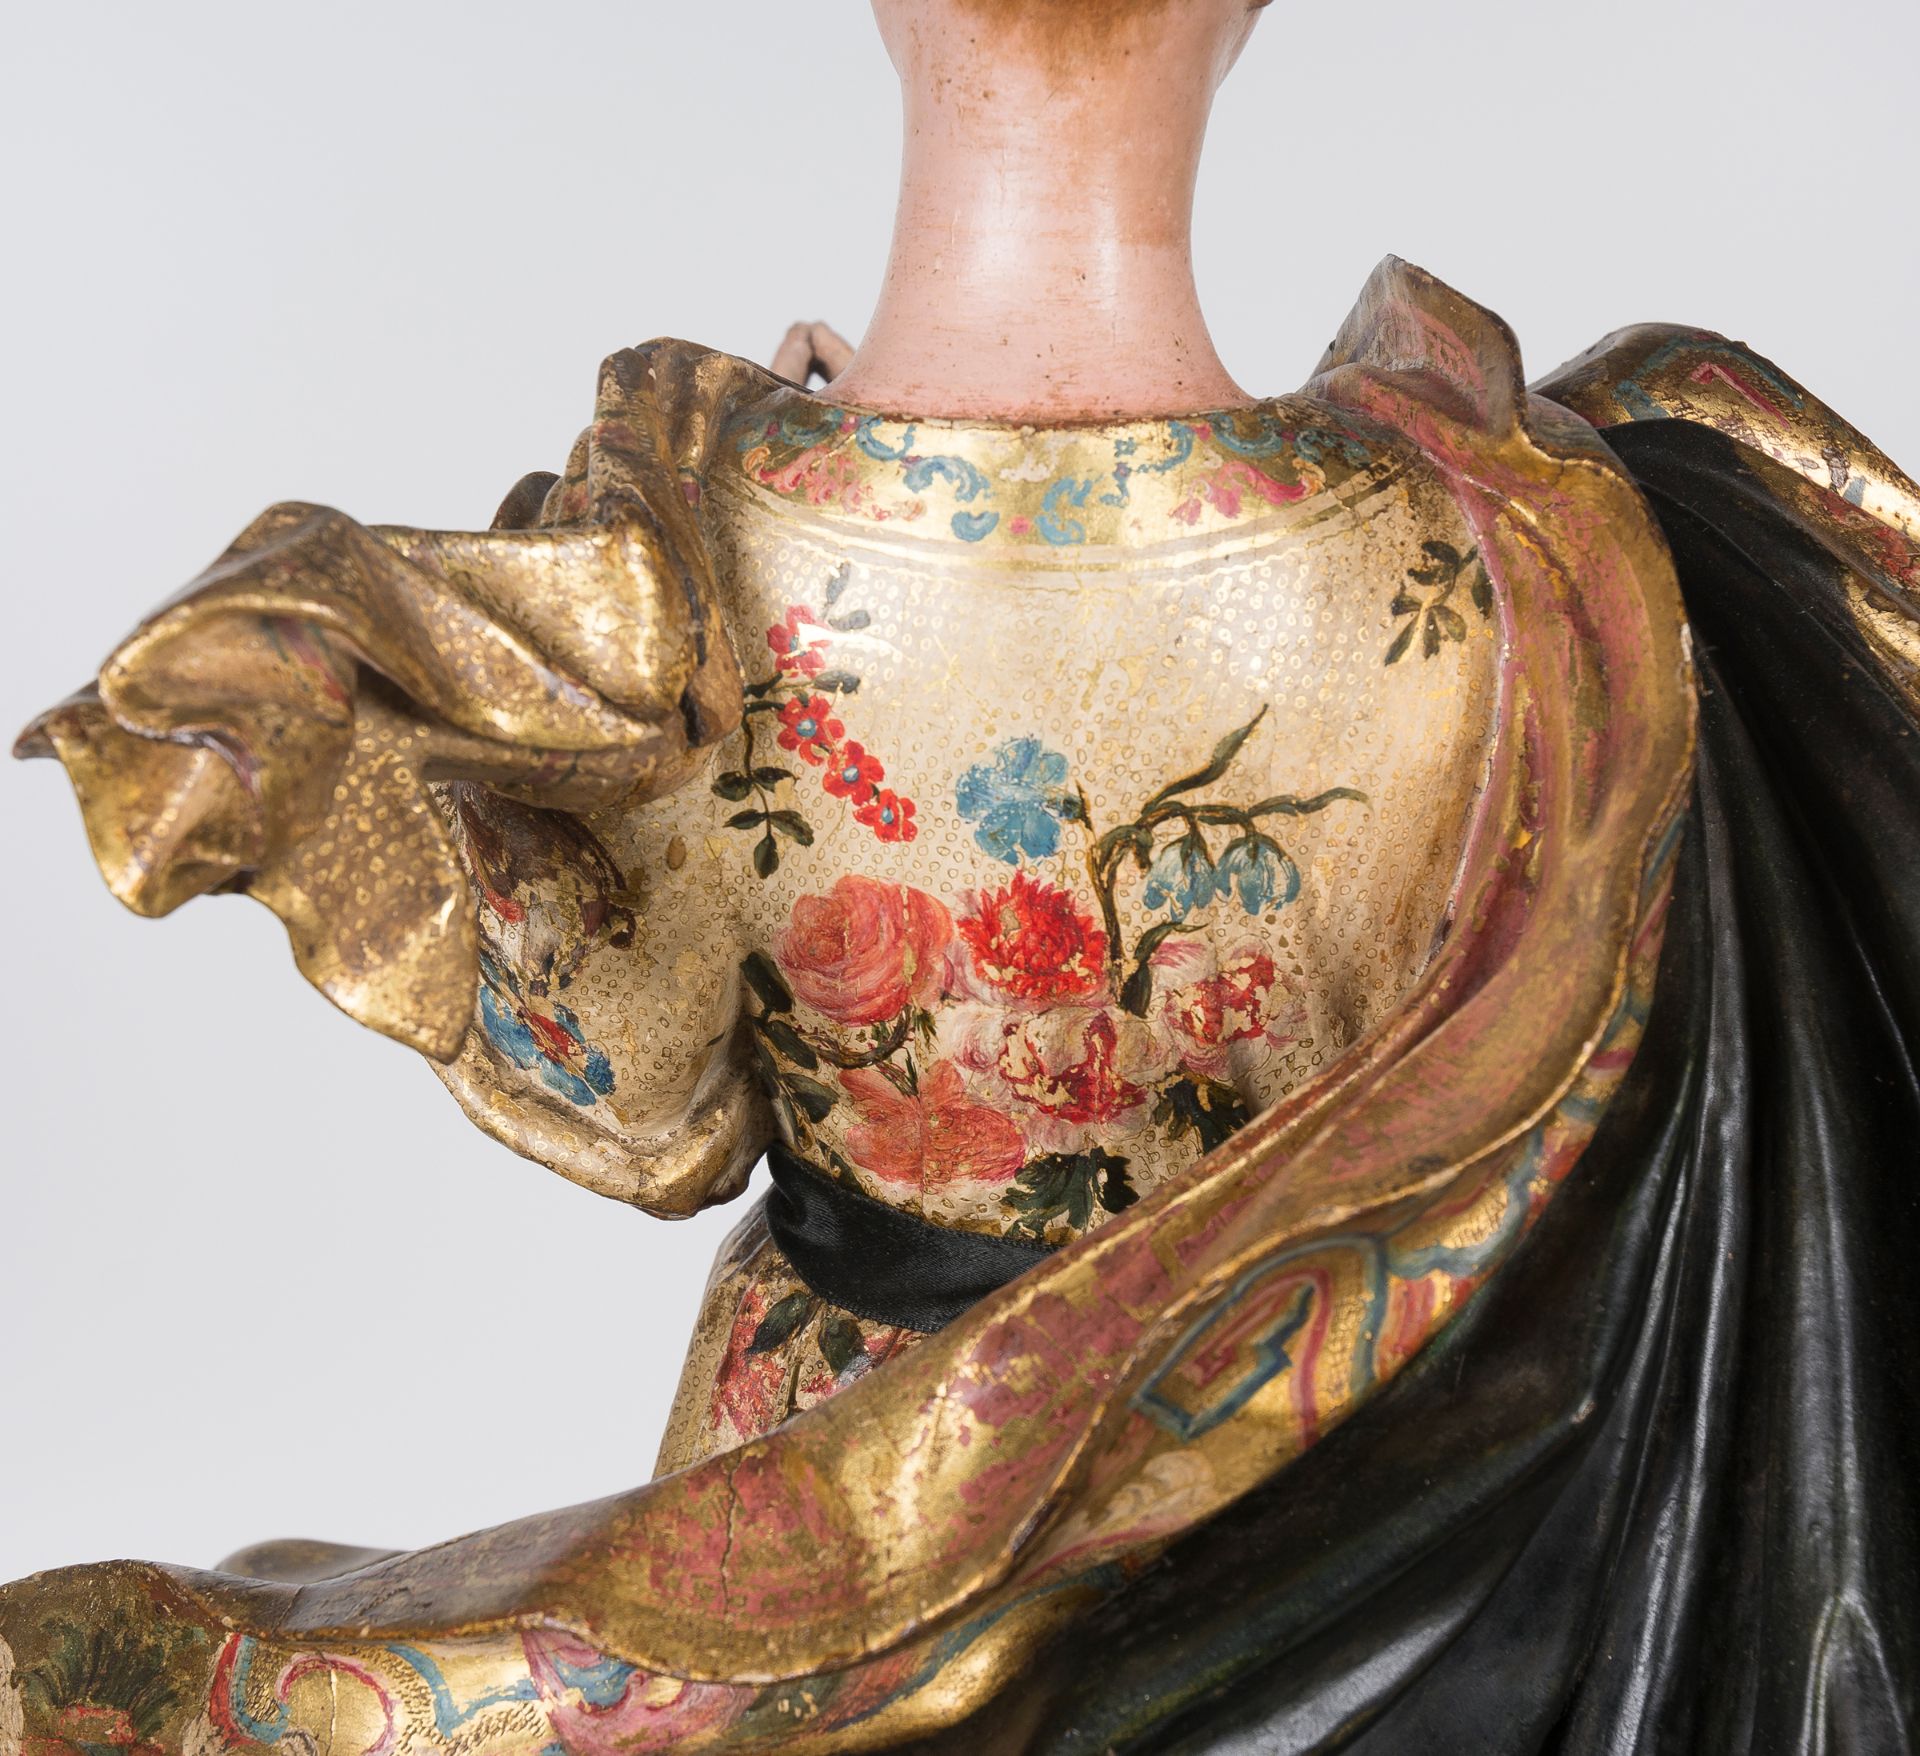 "Our Lady Immaculate". Carved, gilded, estofado technique and polychromed wooden sculpture. Colon - Image 13 of 21